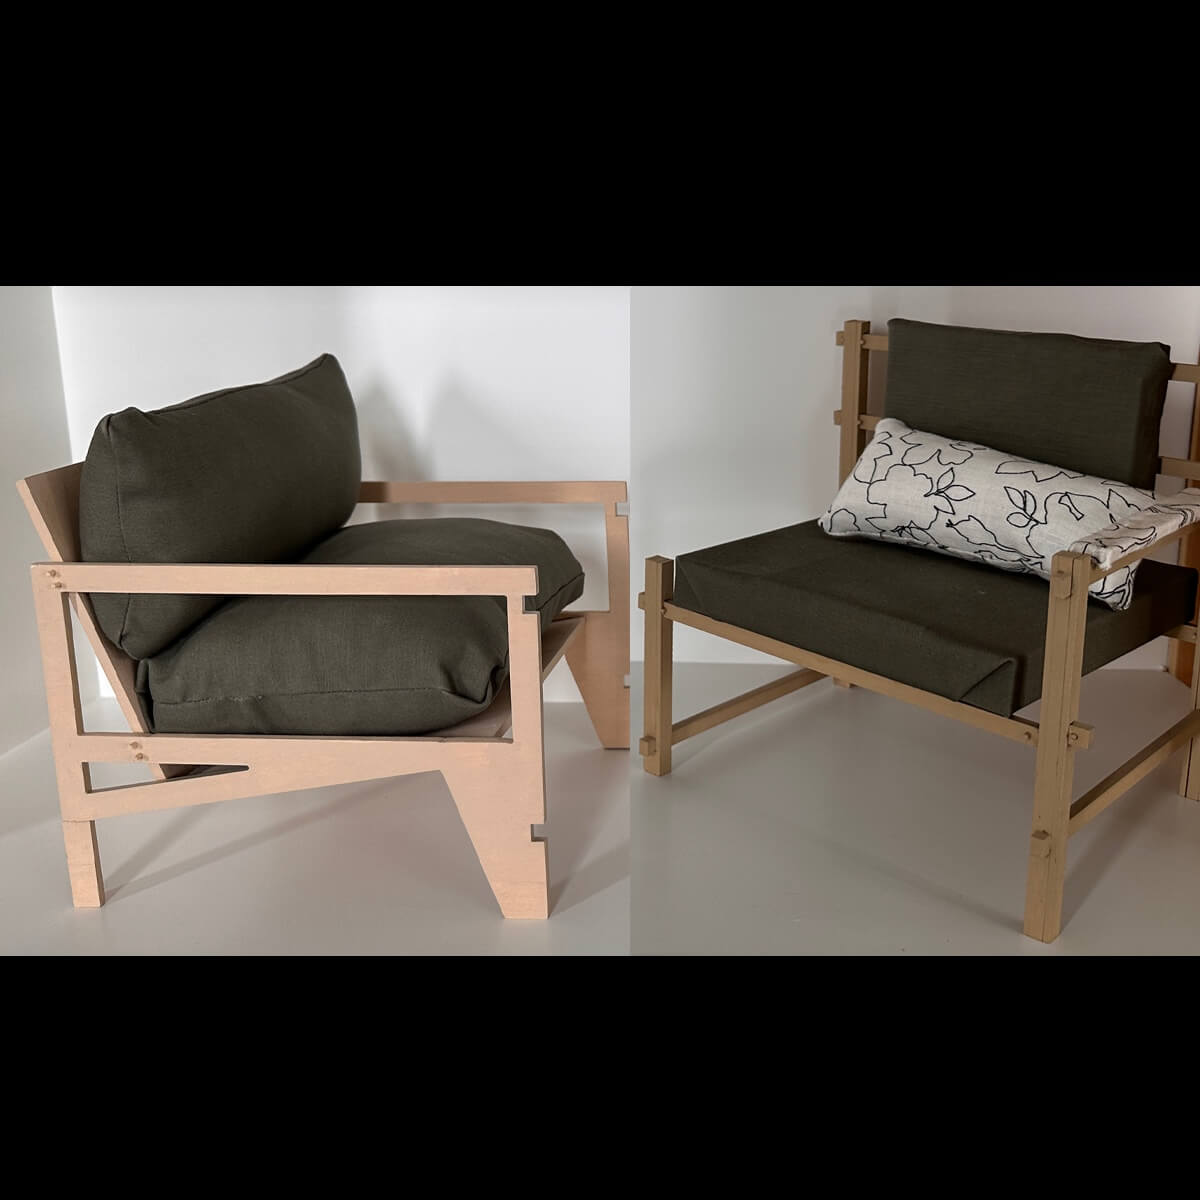 Two student chair designs